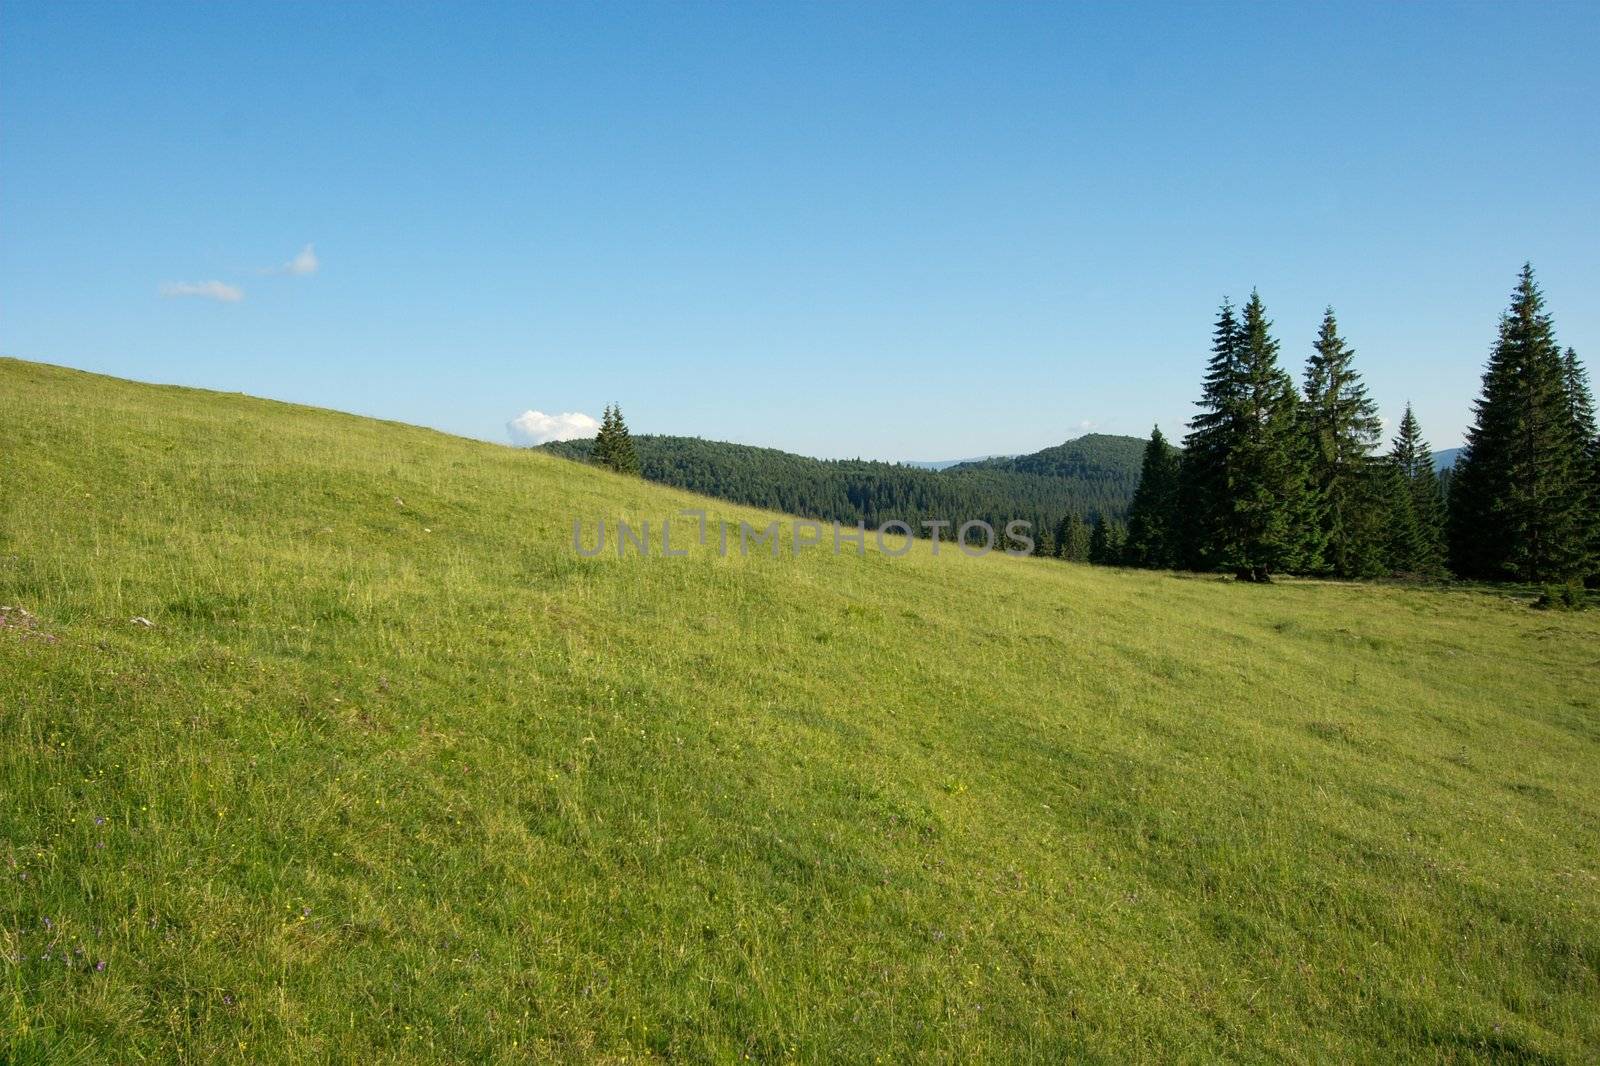 Simple green field on a hilly landscape